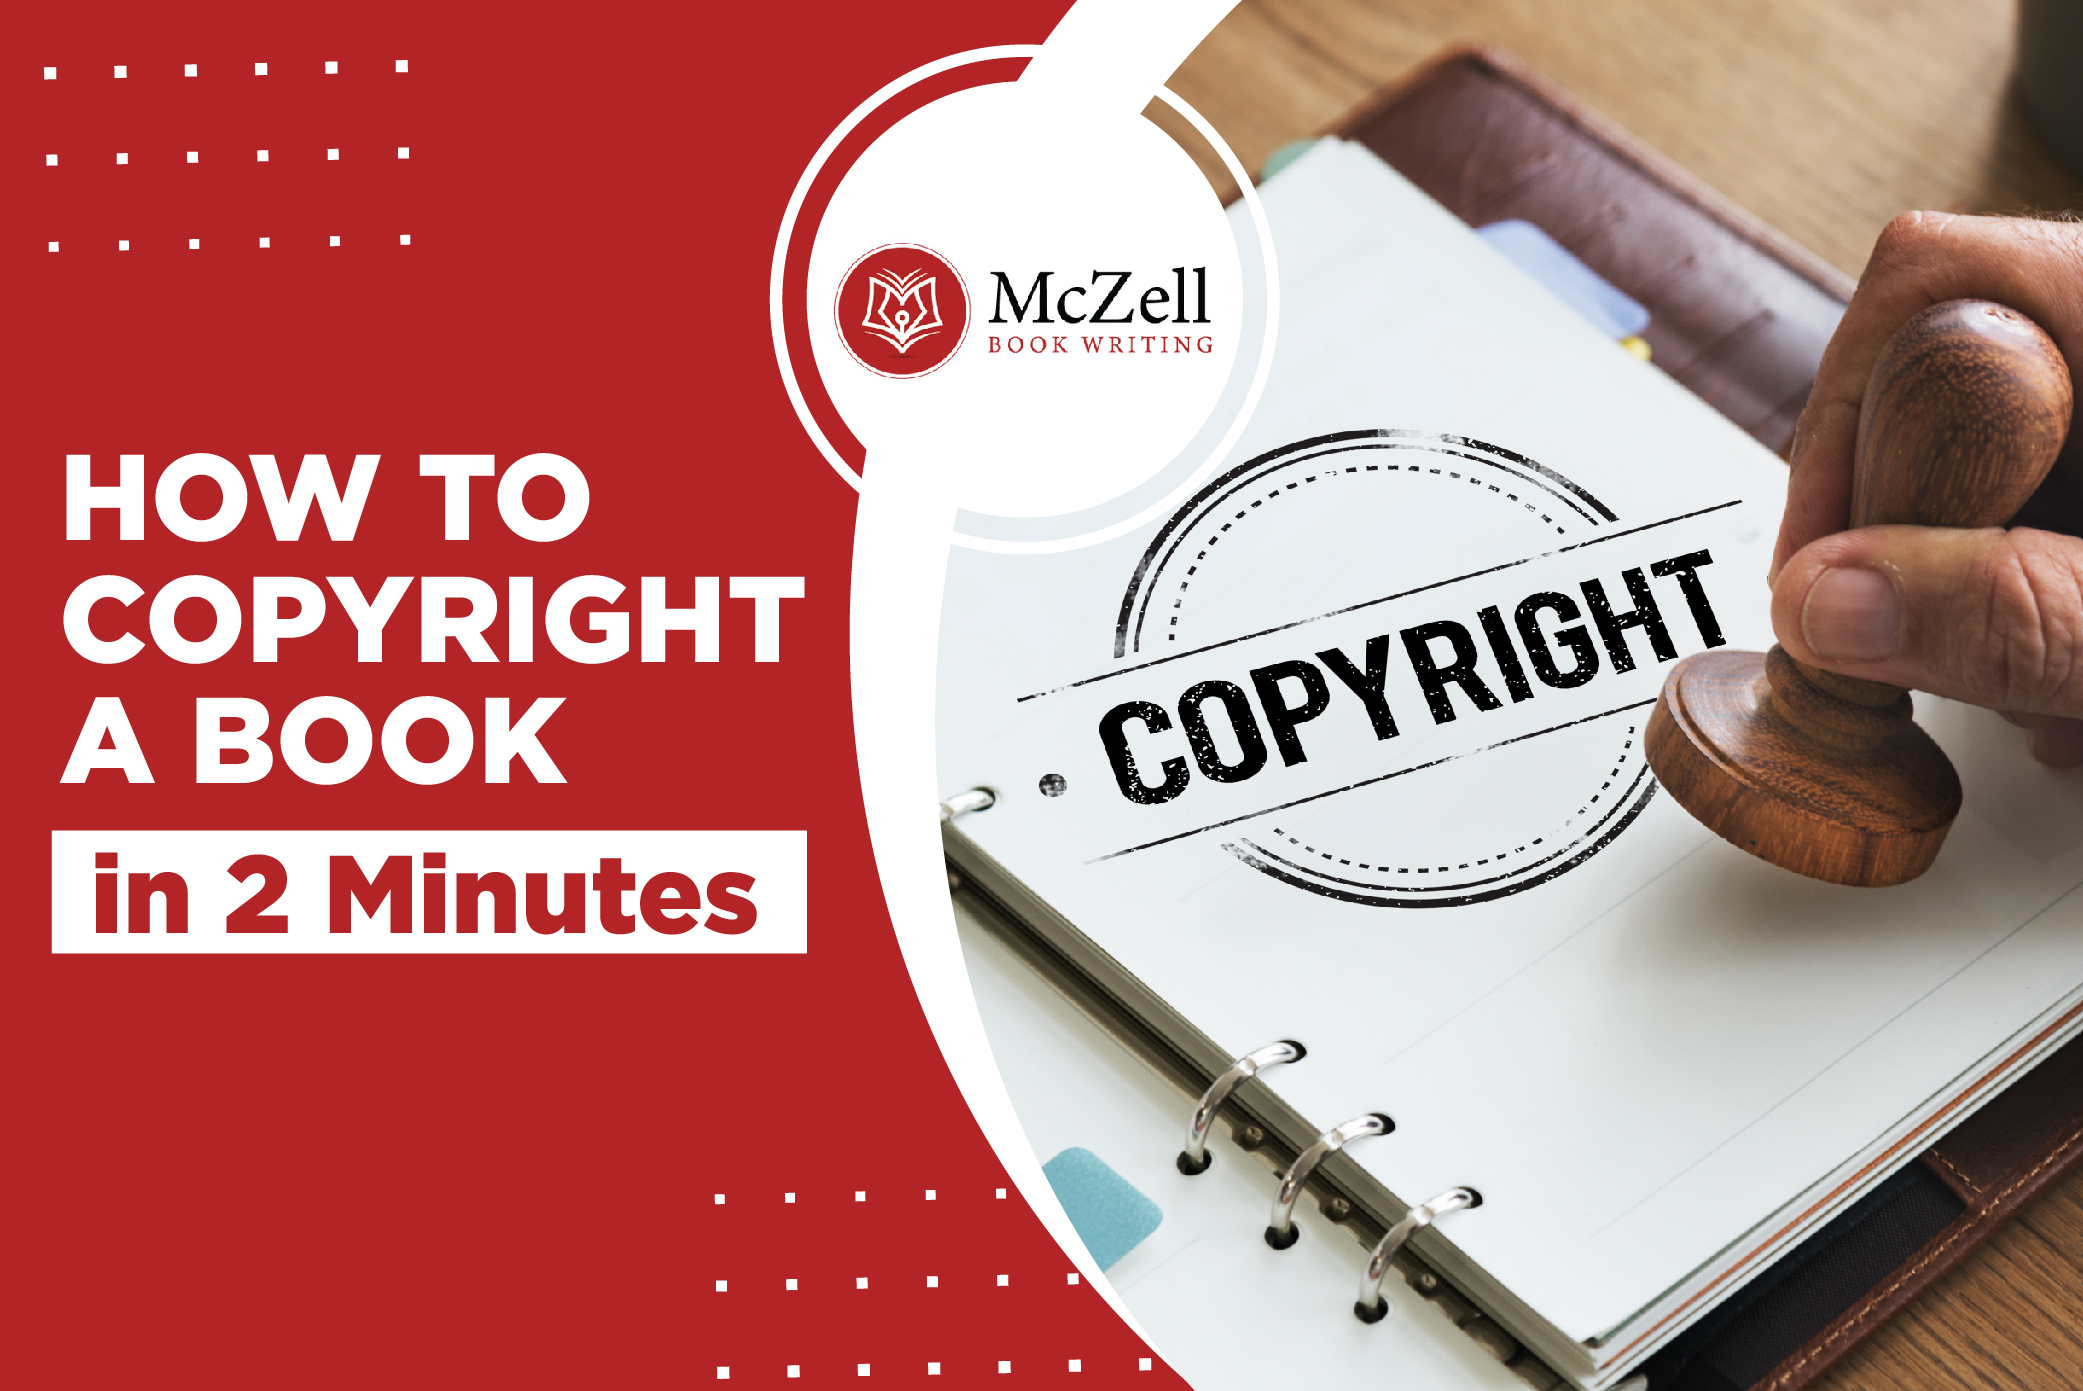 How to Copyright a Book